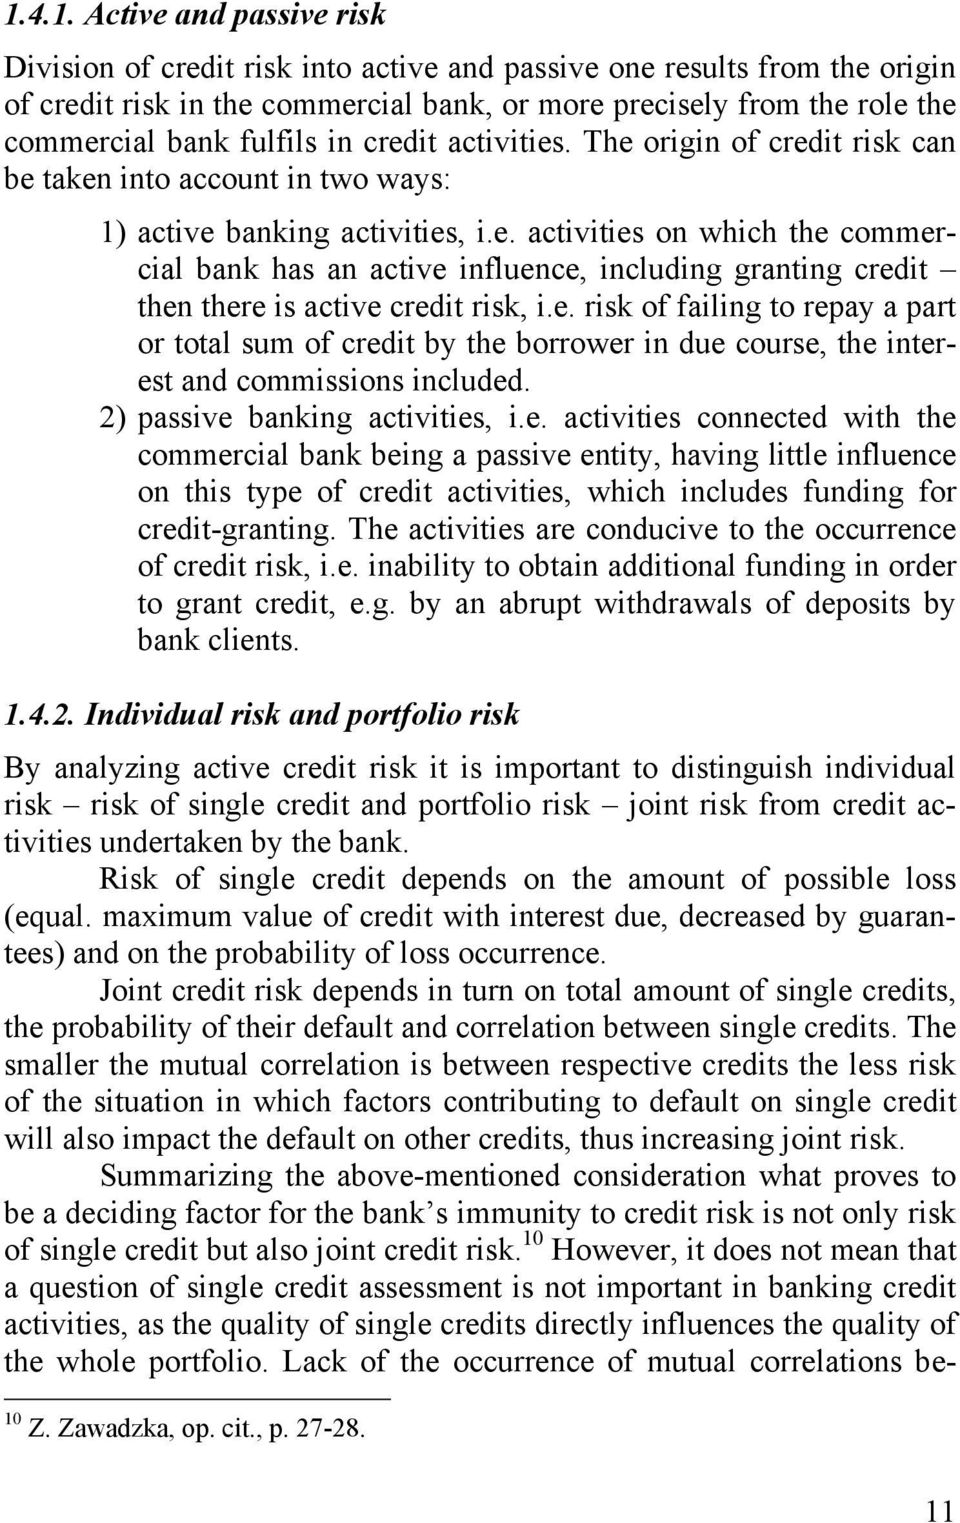 e. risk of failing to repay a part or total sum of credit by the borrower in due course, the interest and commissions included. 2) passive banking activities, i.e. activities connected with the commercial bank being a passive entity, having little influence on this type of credit activities, which includes funding for credit-granting.